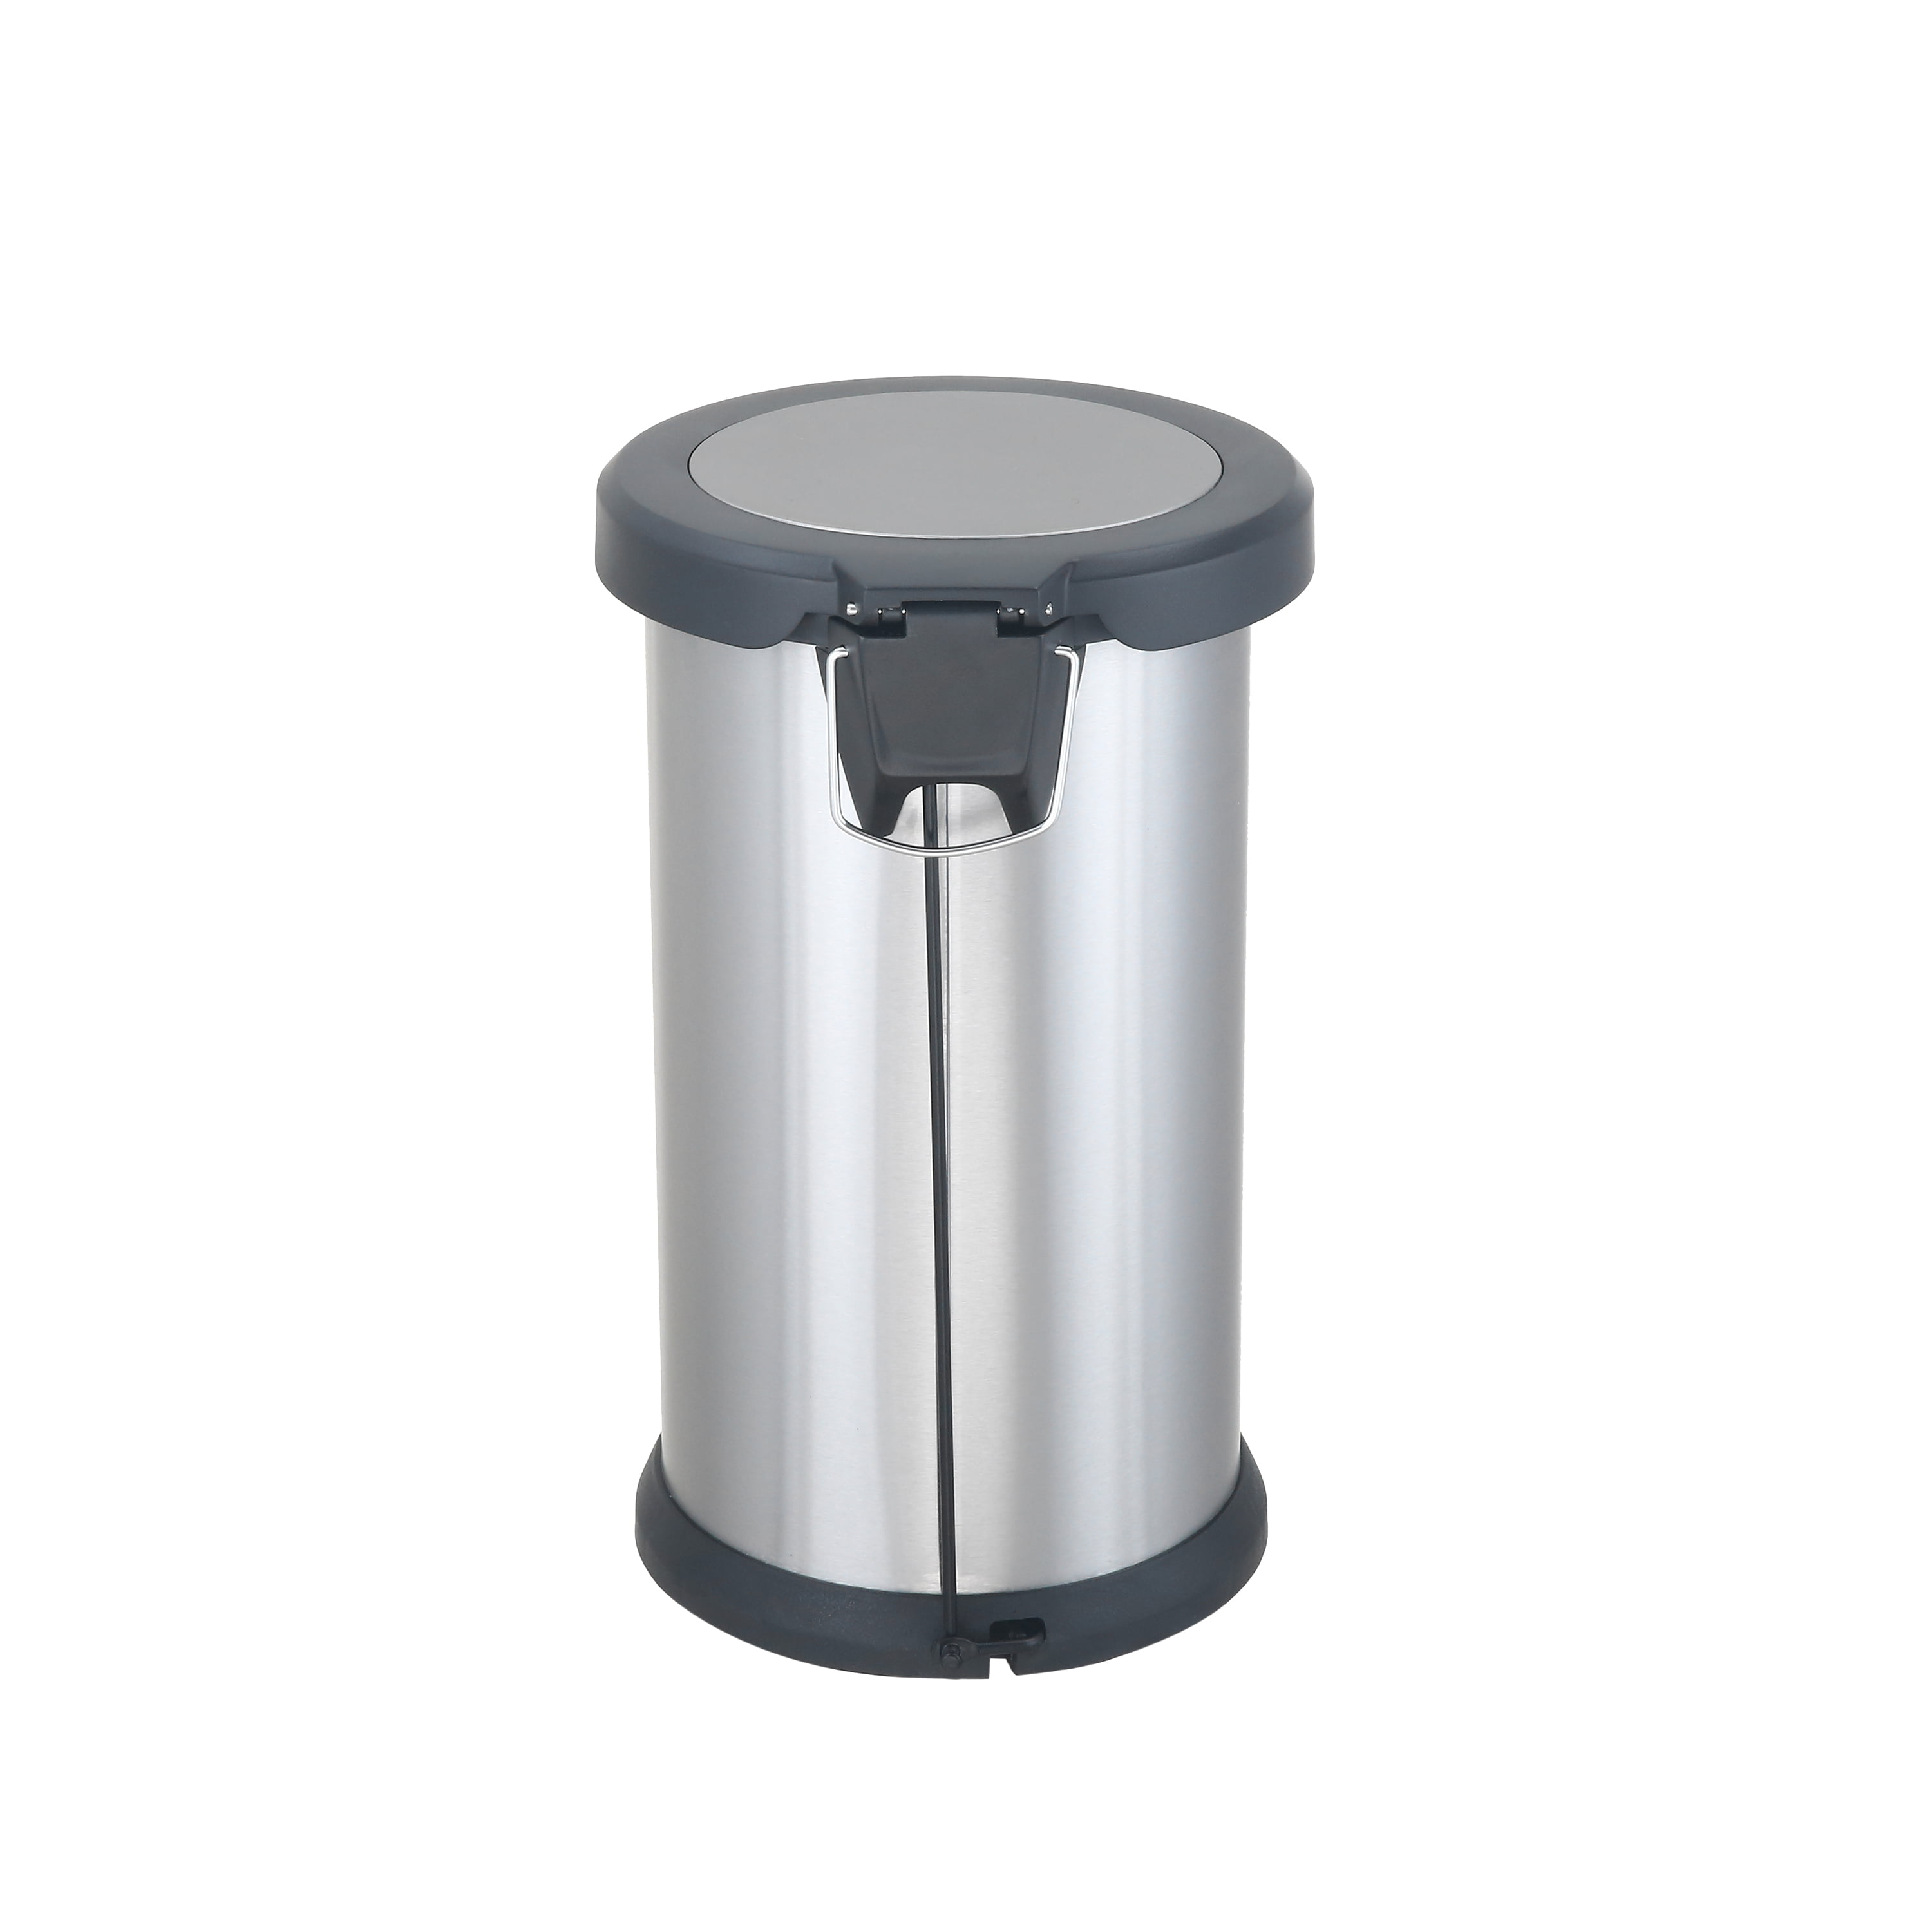 BQKOZFIN 5 Liter / 1.3 Gallon Round Bathroom Trash Can with Steel Bar Pedal Brushed Stainless Steel Garbage Can for Garbage or Recycling for Kitchen/Home/Office Silver 